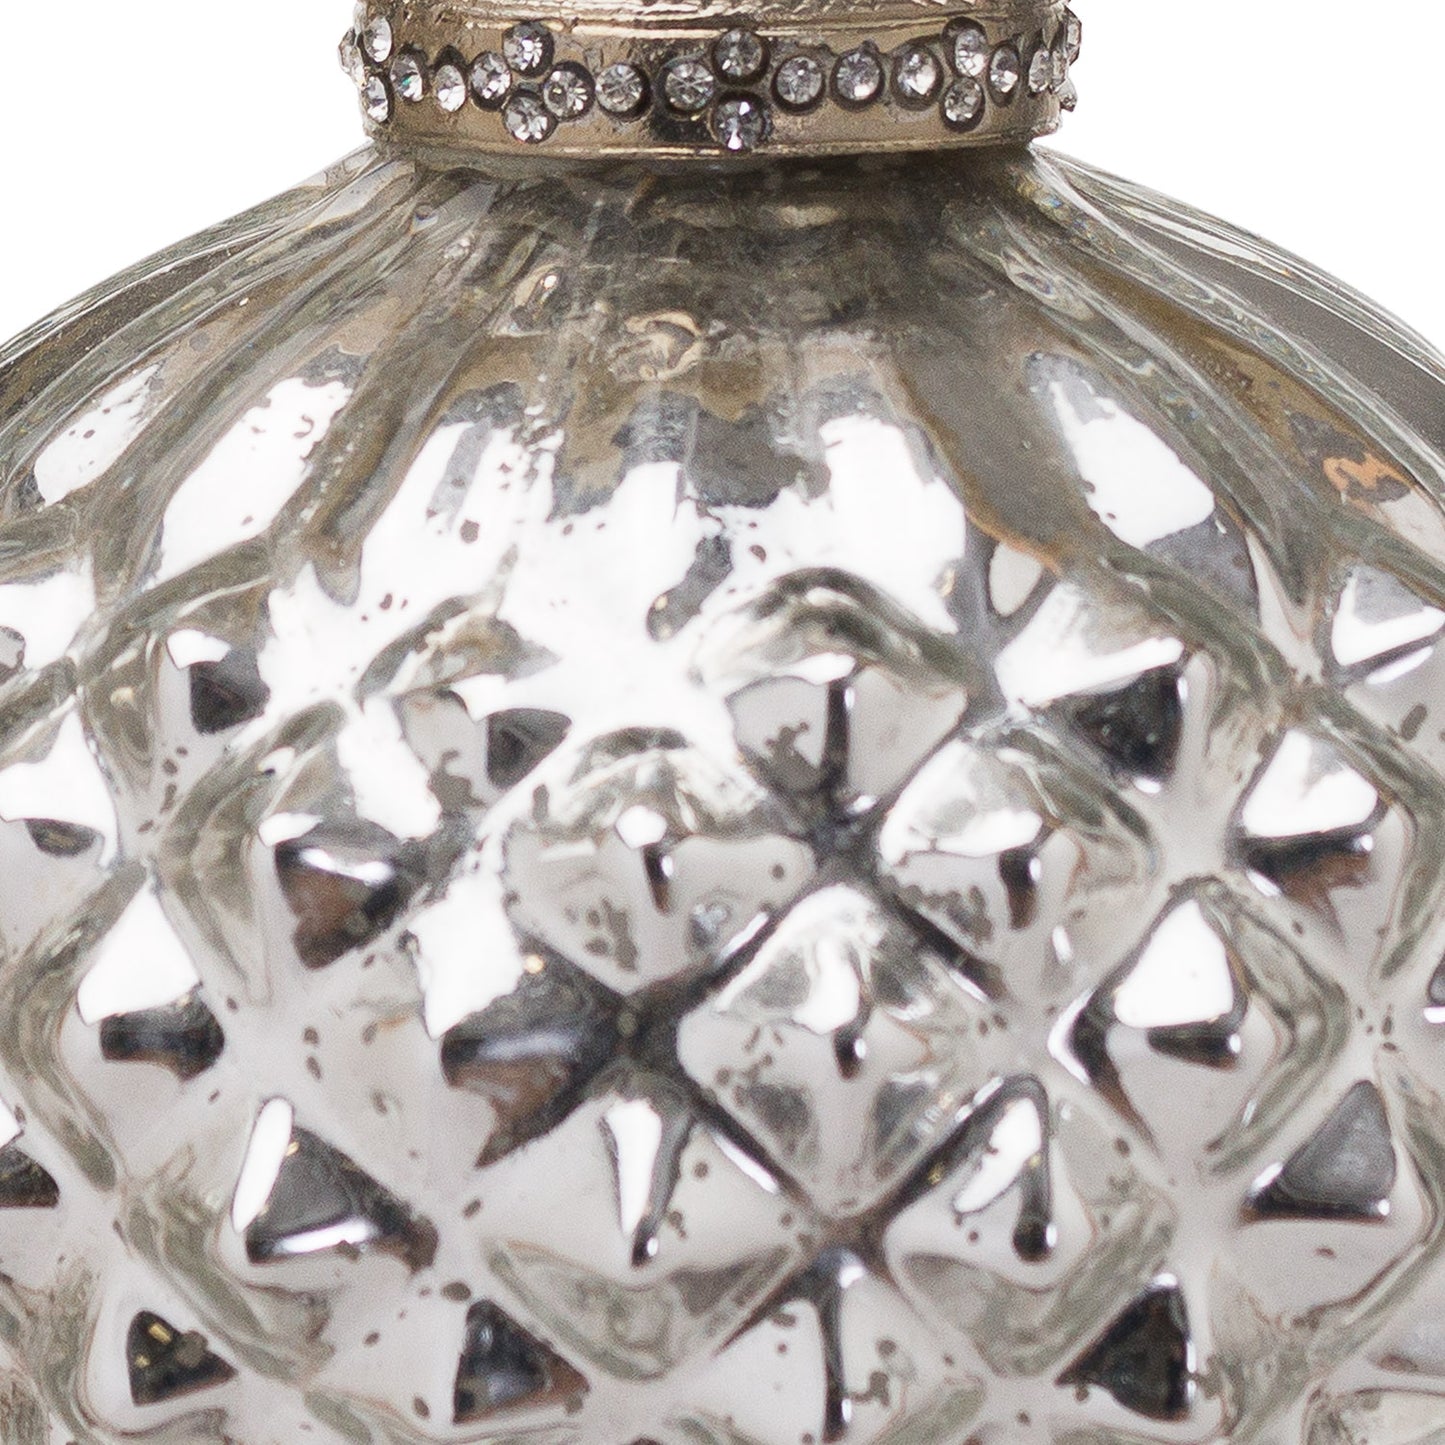 The Noel Collection Silver Textured Large Hanging Bauble